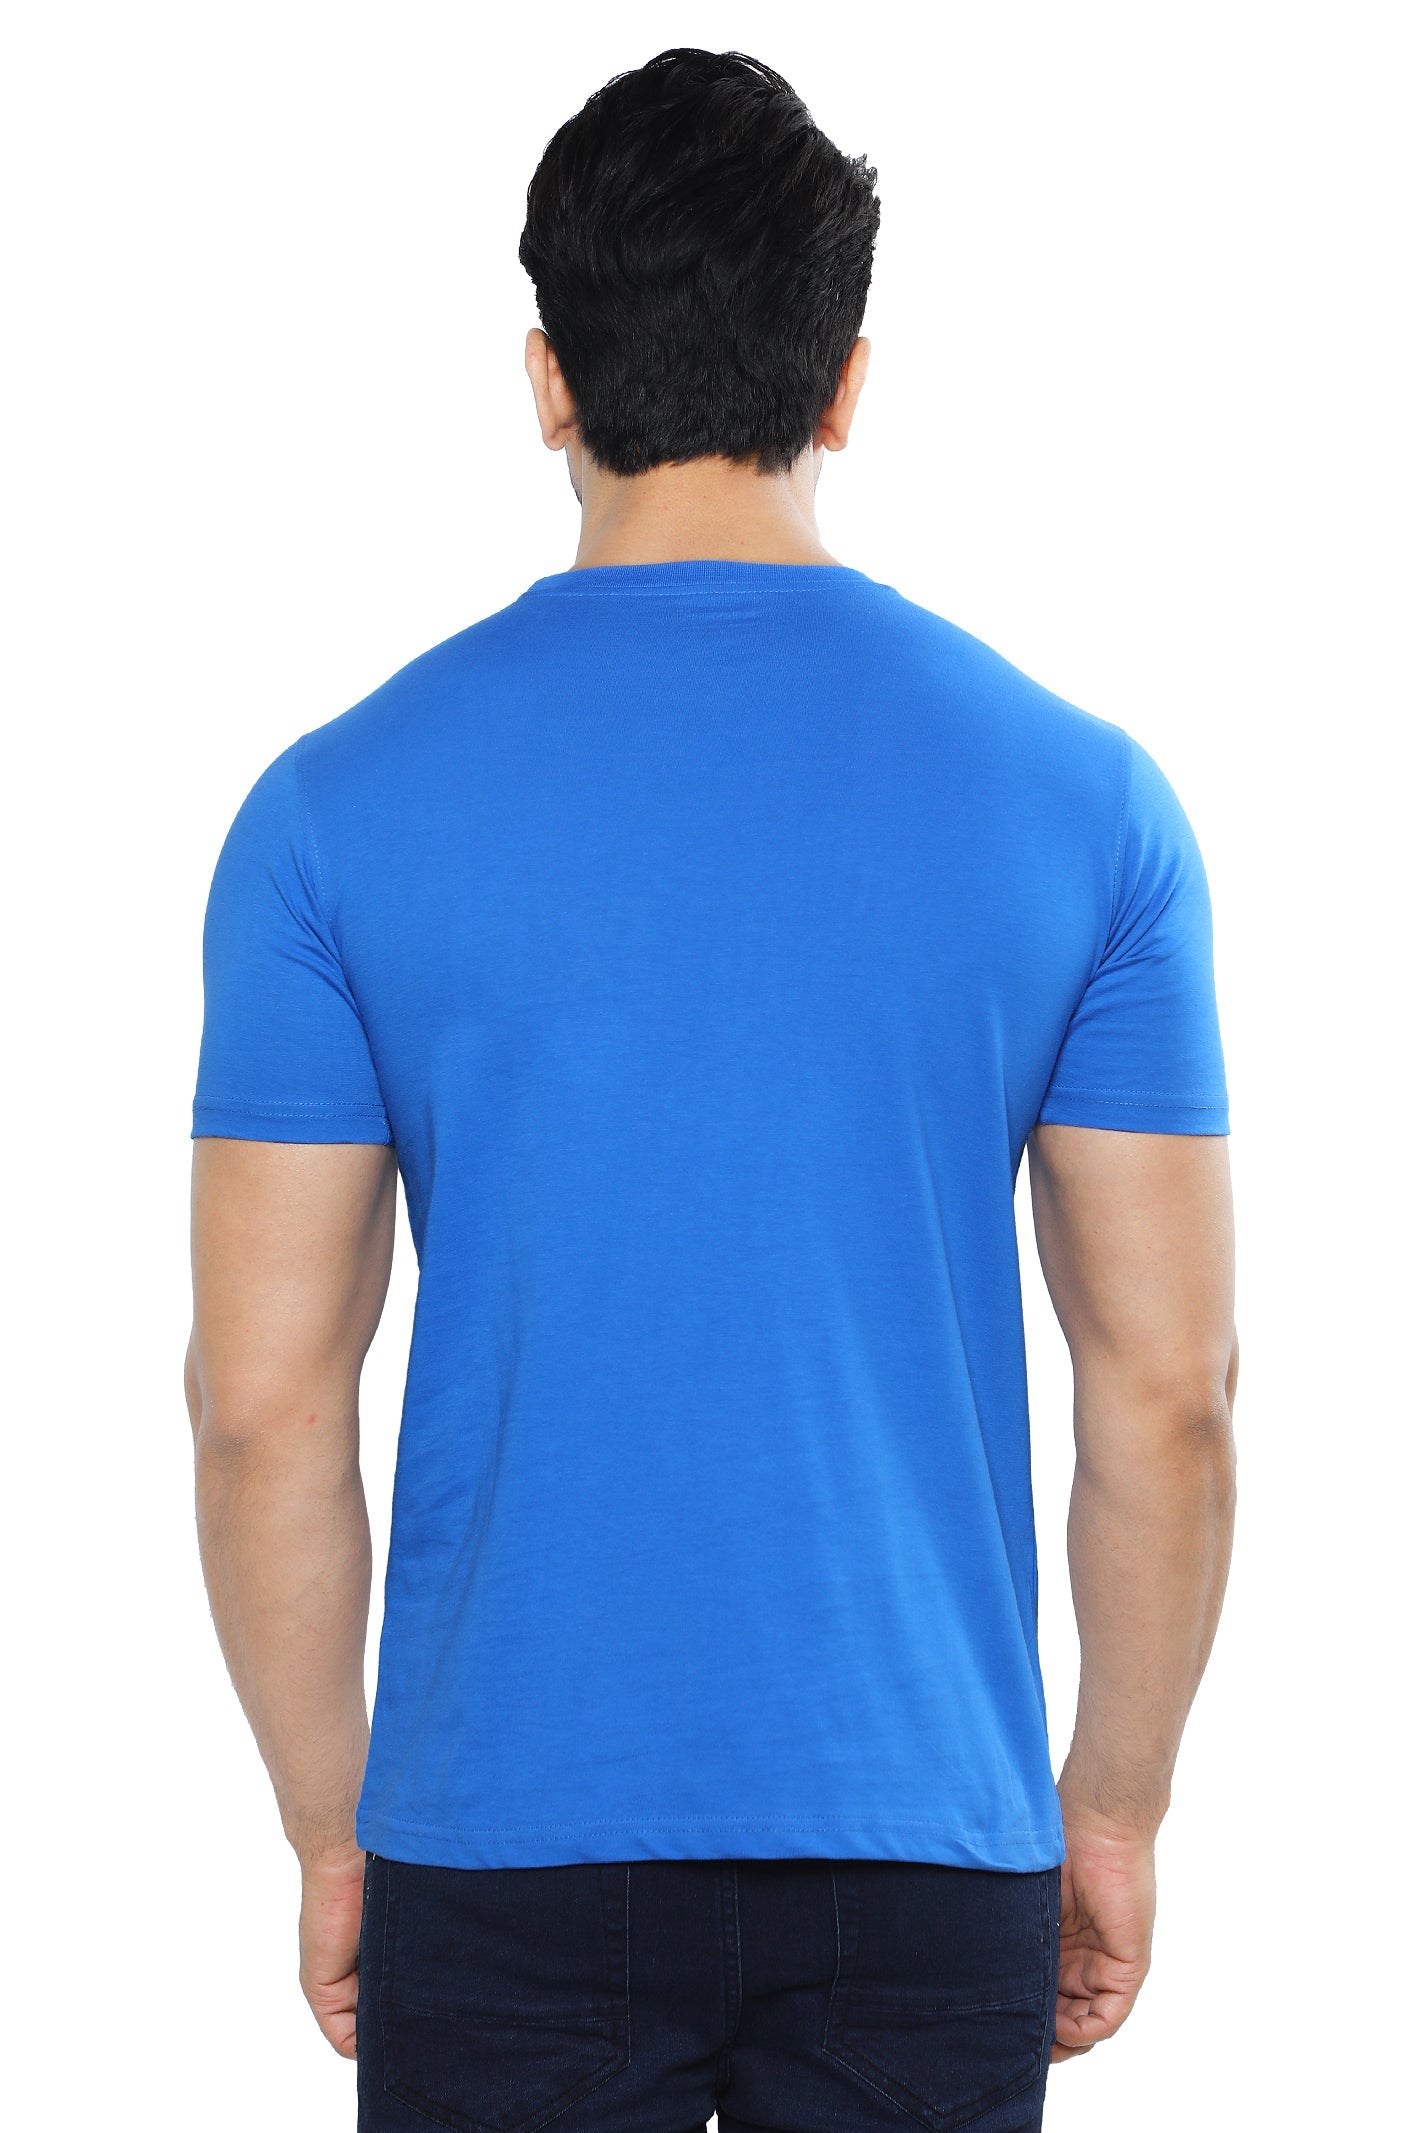 Diners Men's Round Neck T-Shirt SKU: NA816-R-BLUE - Diners